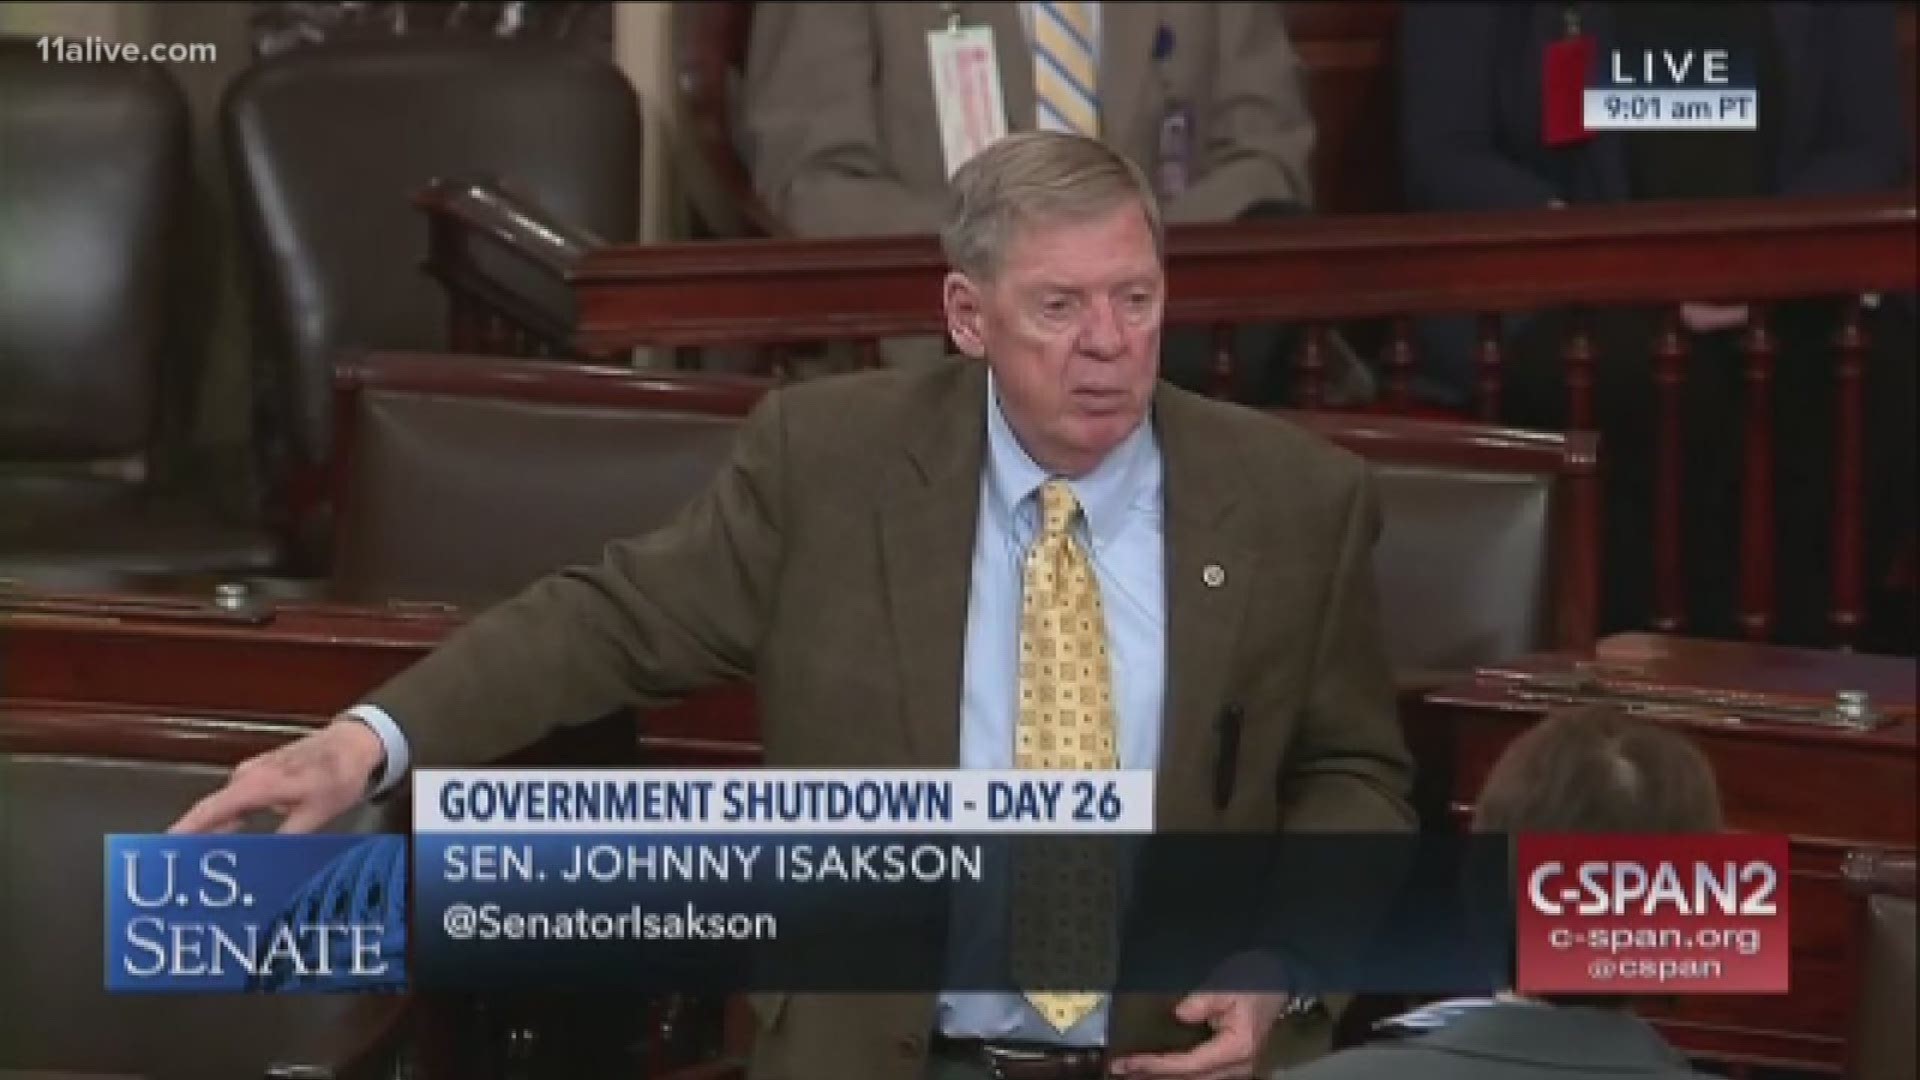 “Airports, highways, everywhere you cross a border, we charge fees for all kinds of things,” Isakson said on the Senate floor on Wednesday. “It’s a mechanism to fund security at the border.”